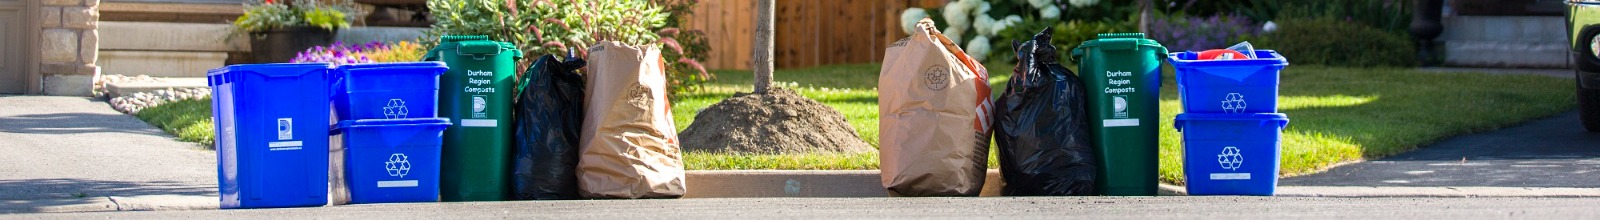 Garbage, recycling, and yard waste at the curb